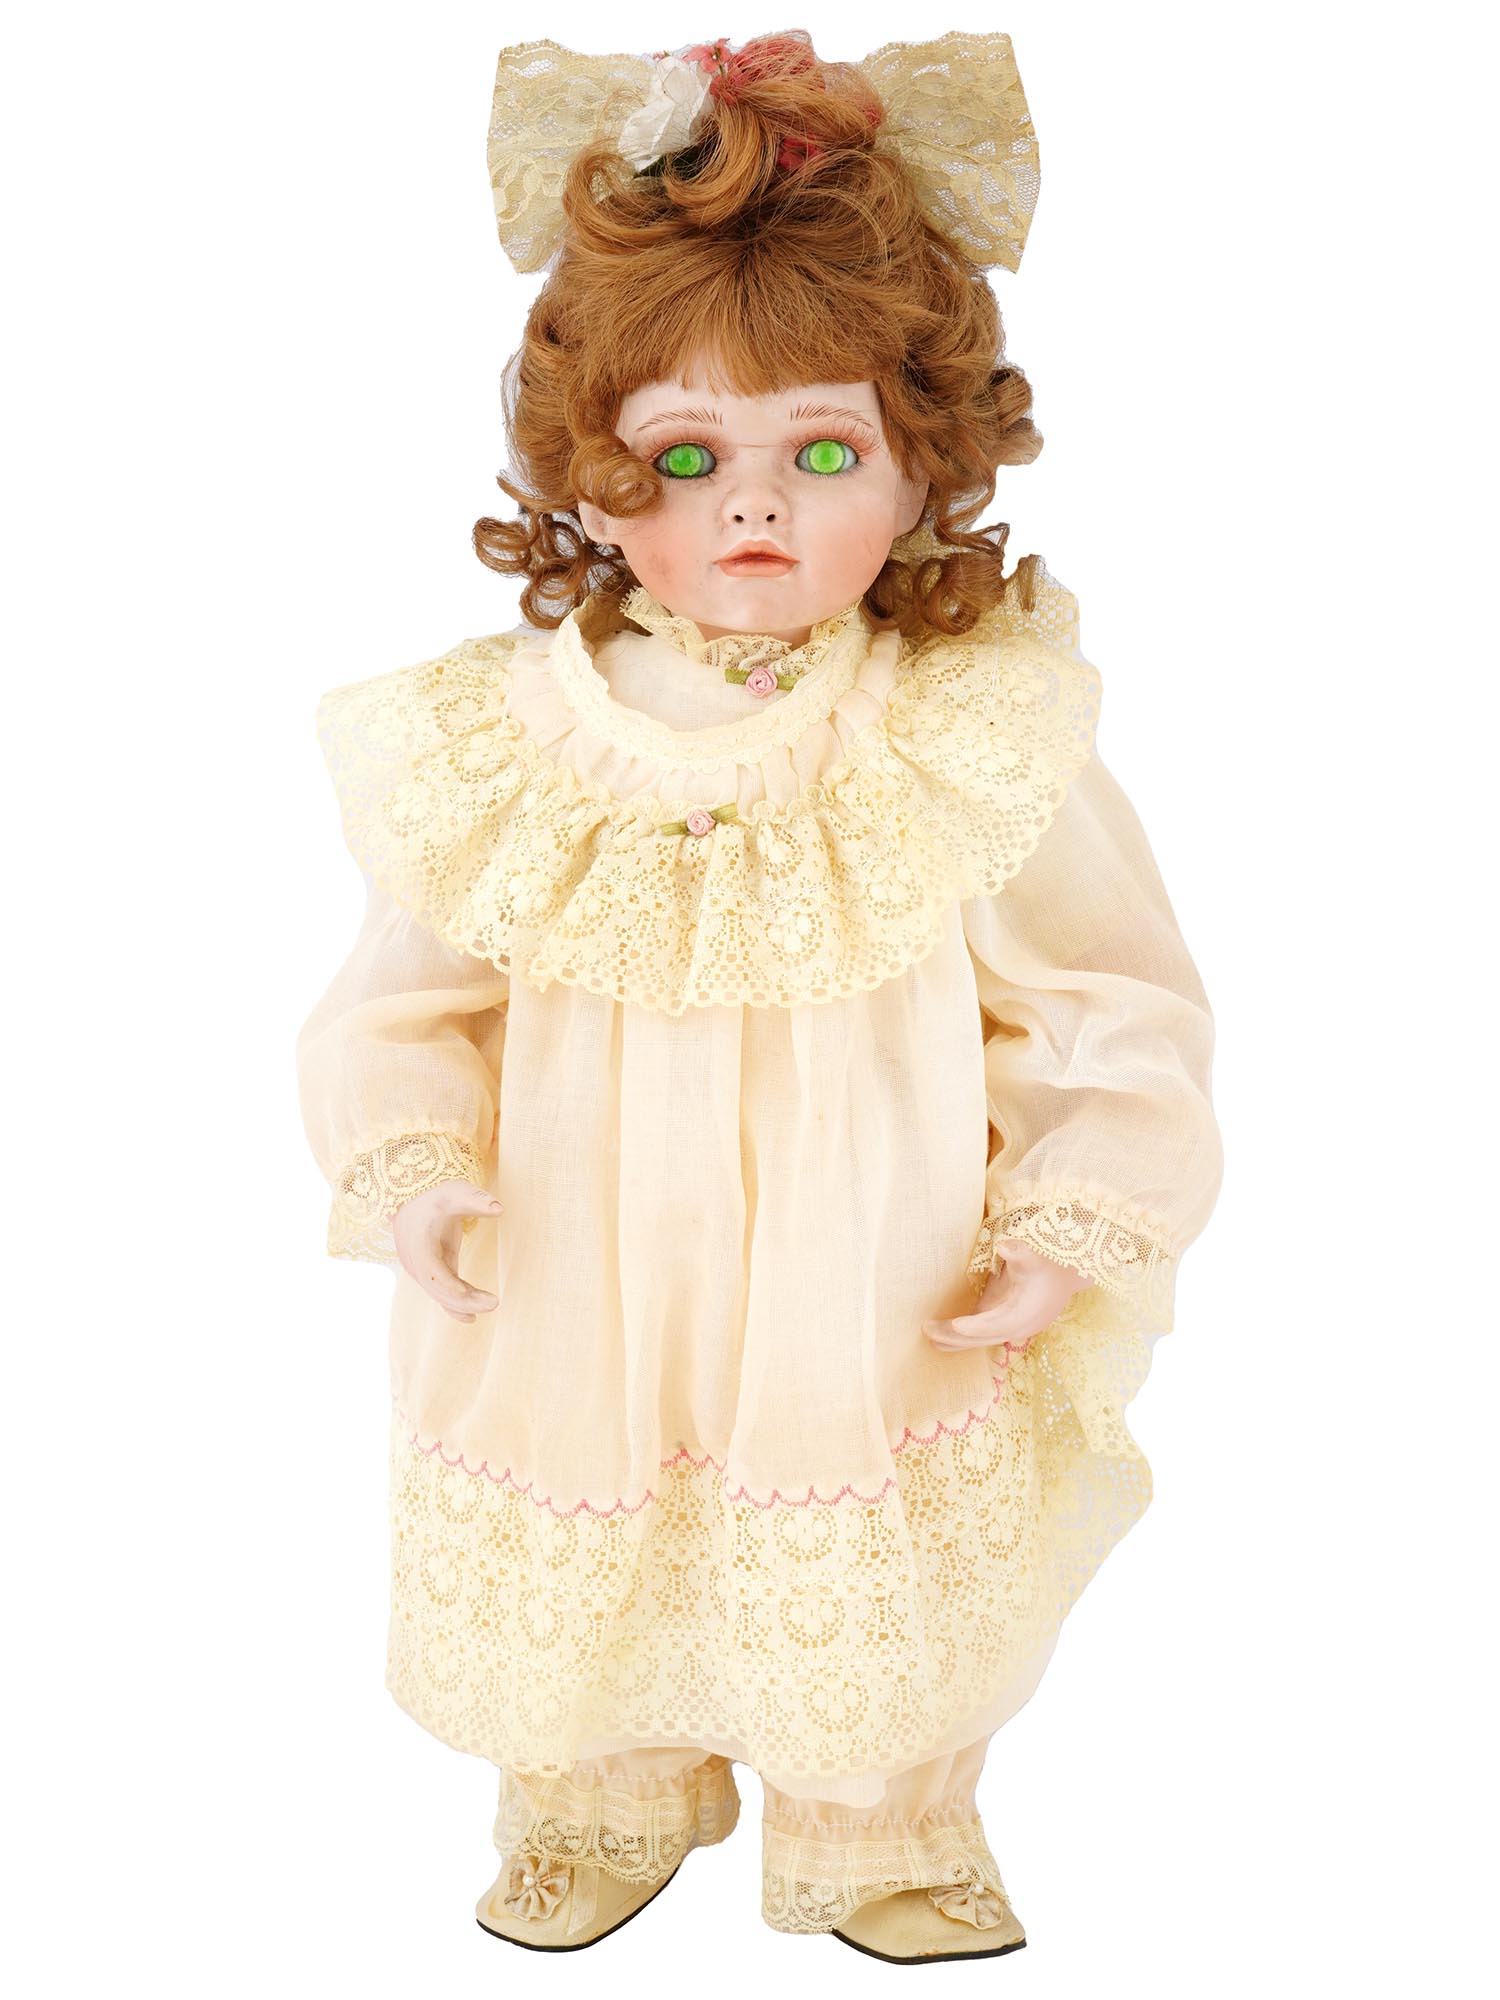 COLLECTION OF VINTAGE PORCELAIN DOLLS IN OUTFITS PIC-2